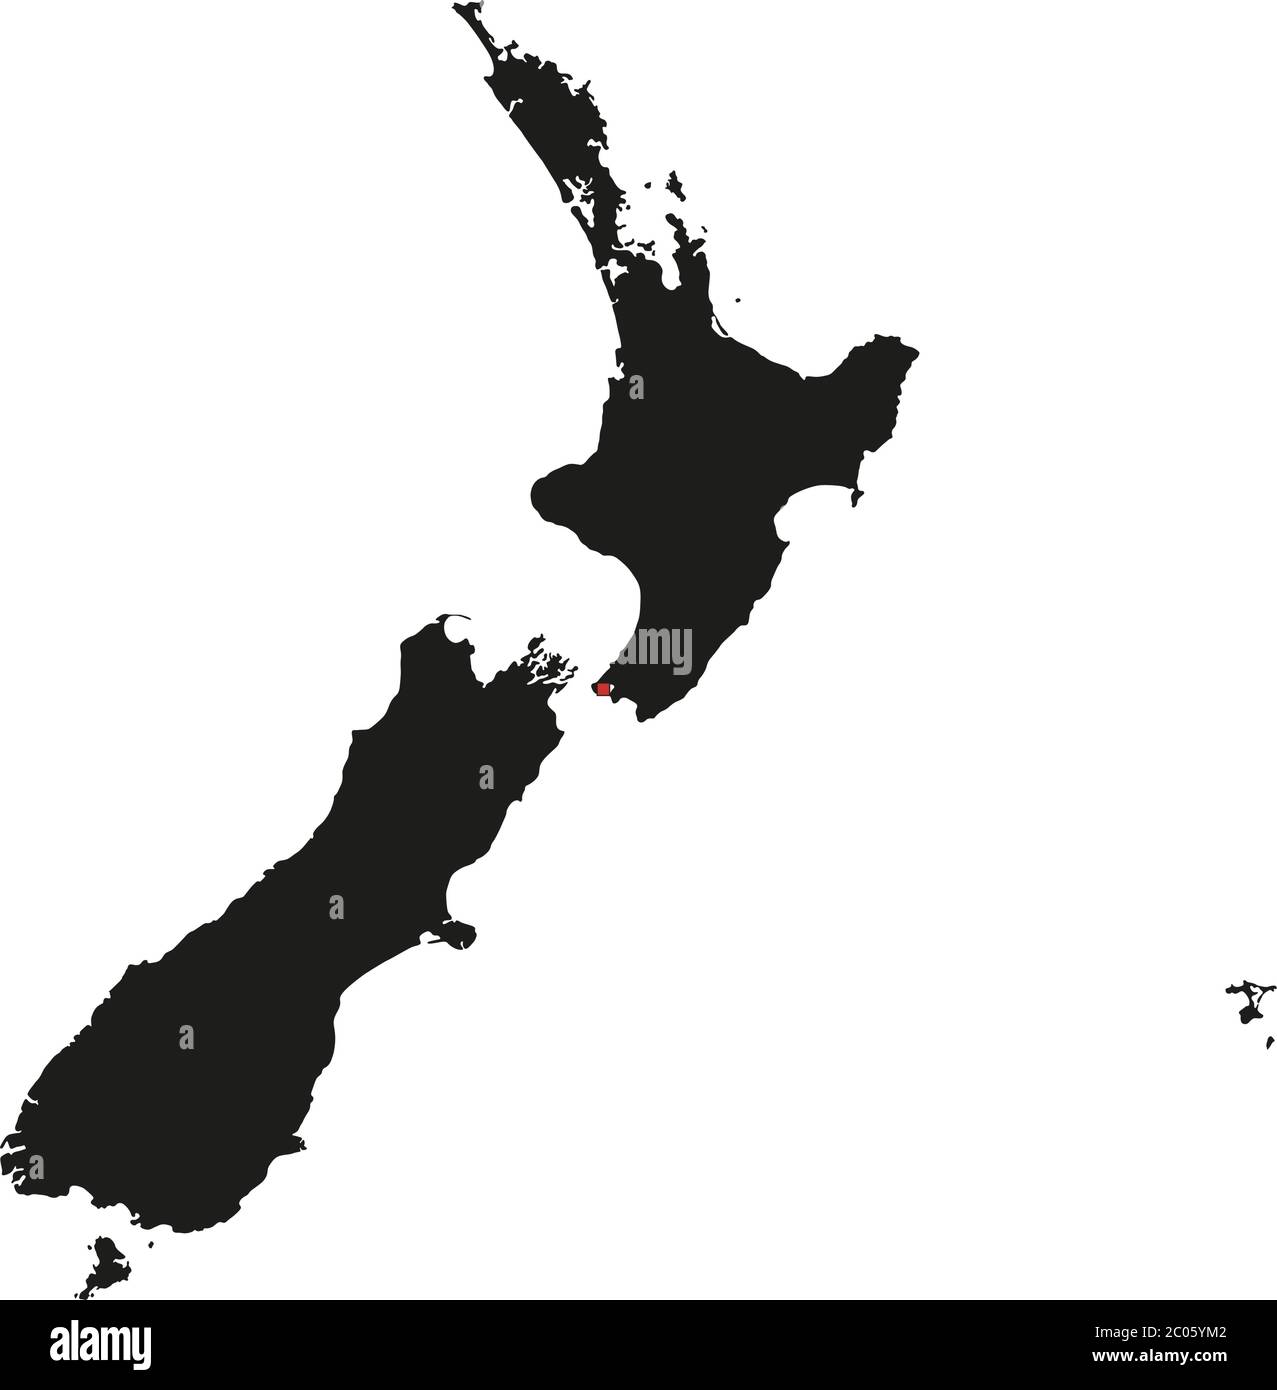 Highly Detailed New Zealand Silhouette map. Stock Vector